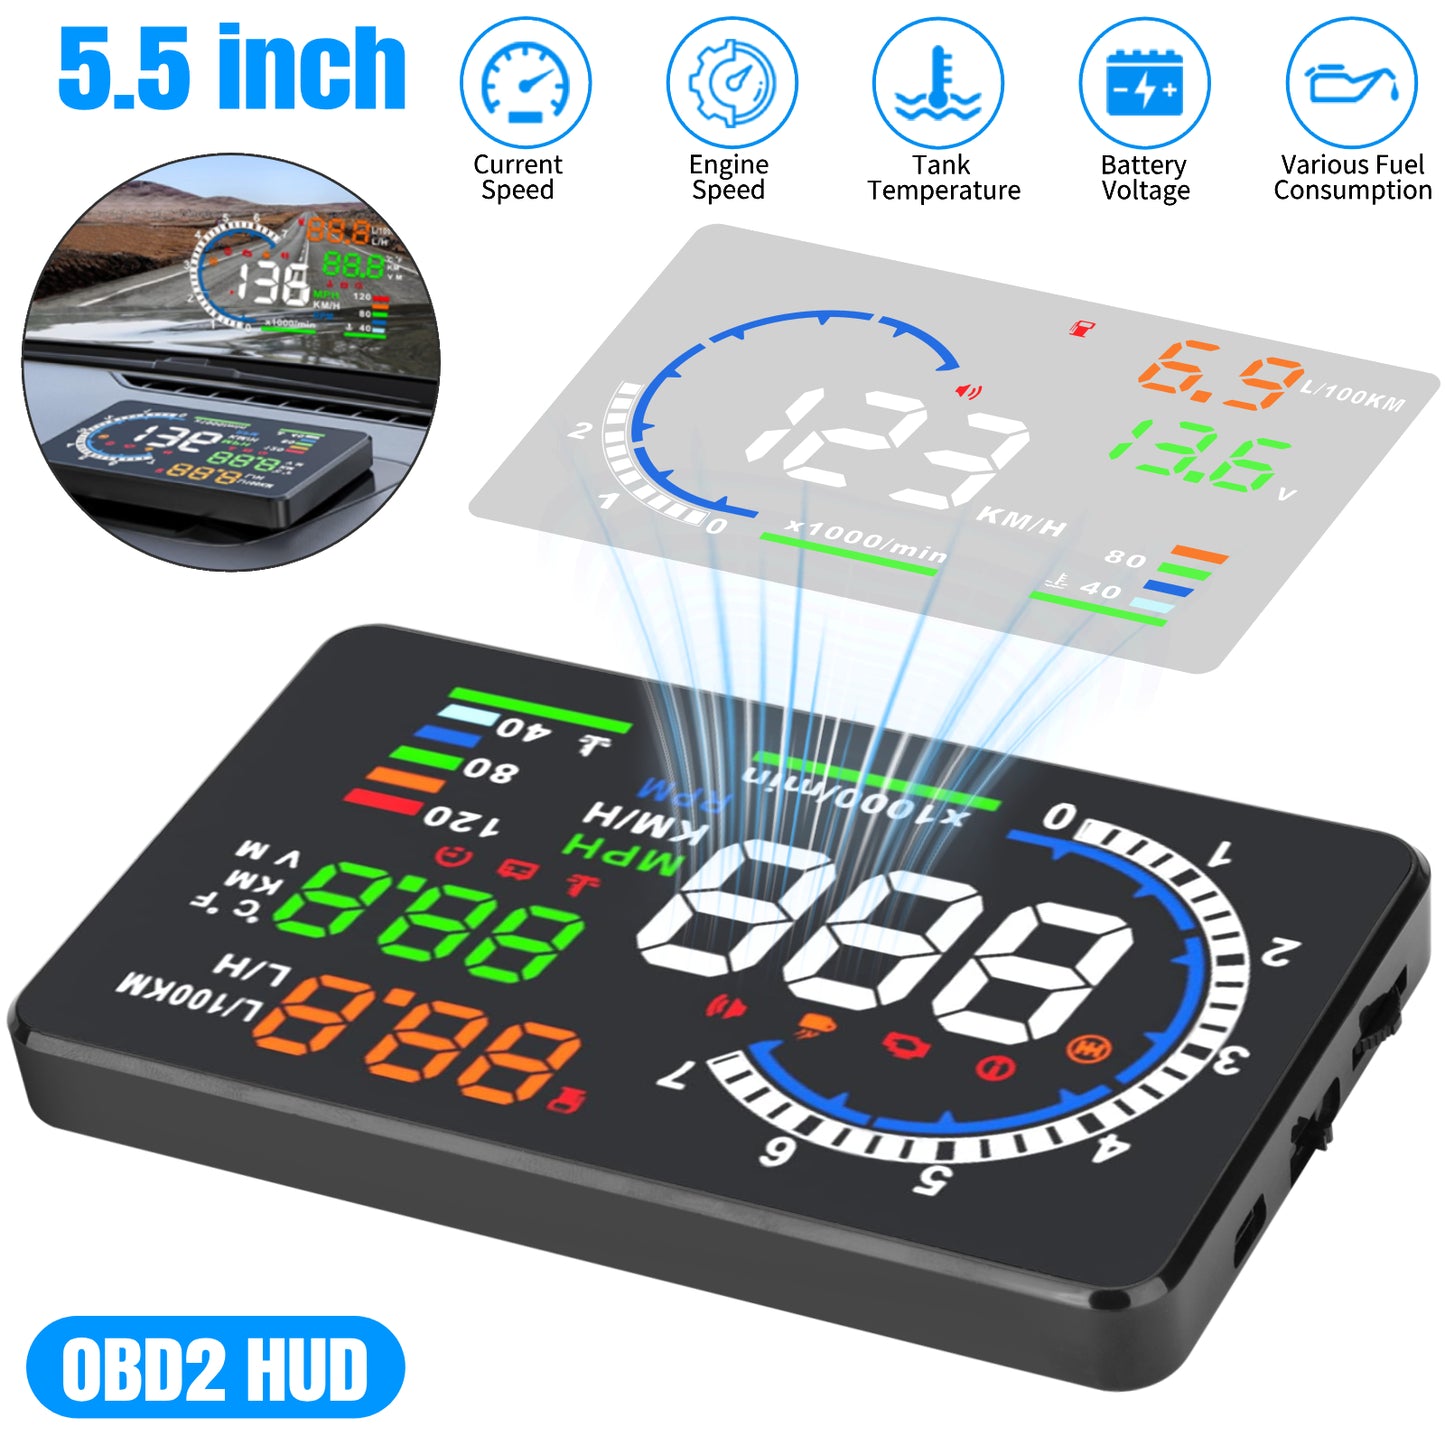 A8 HUD Display OBD2 5.5" Dash Screen Projector - Auto Gauge RPM MPH/KM Speedometer Overspeed Warning Fuel Consumption Windshield Display Multiple-Color Bright for Car Truck (Black)